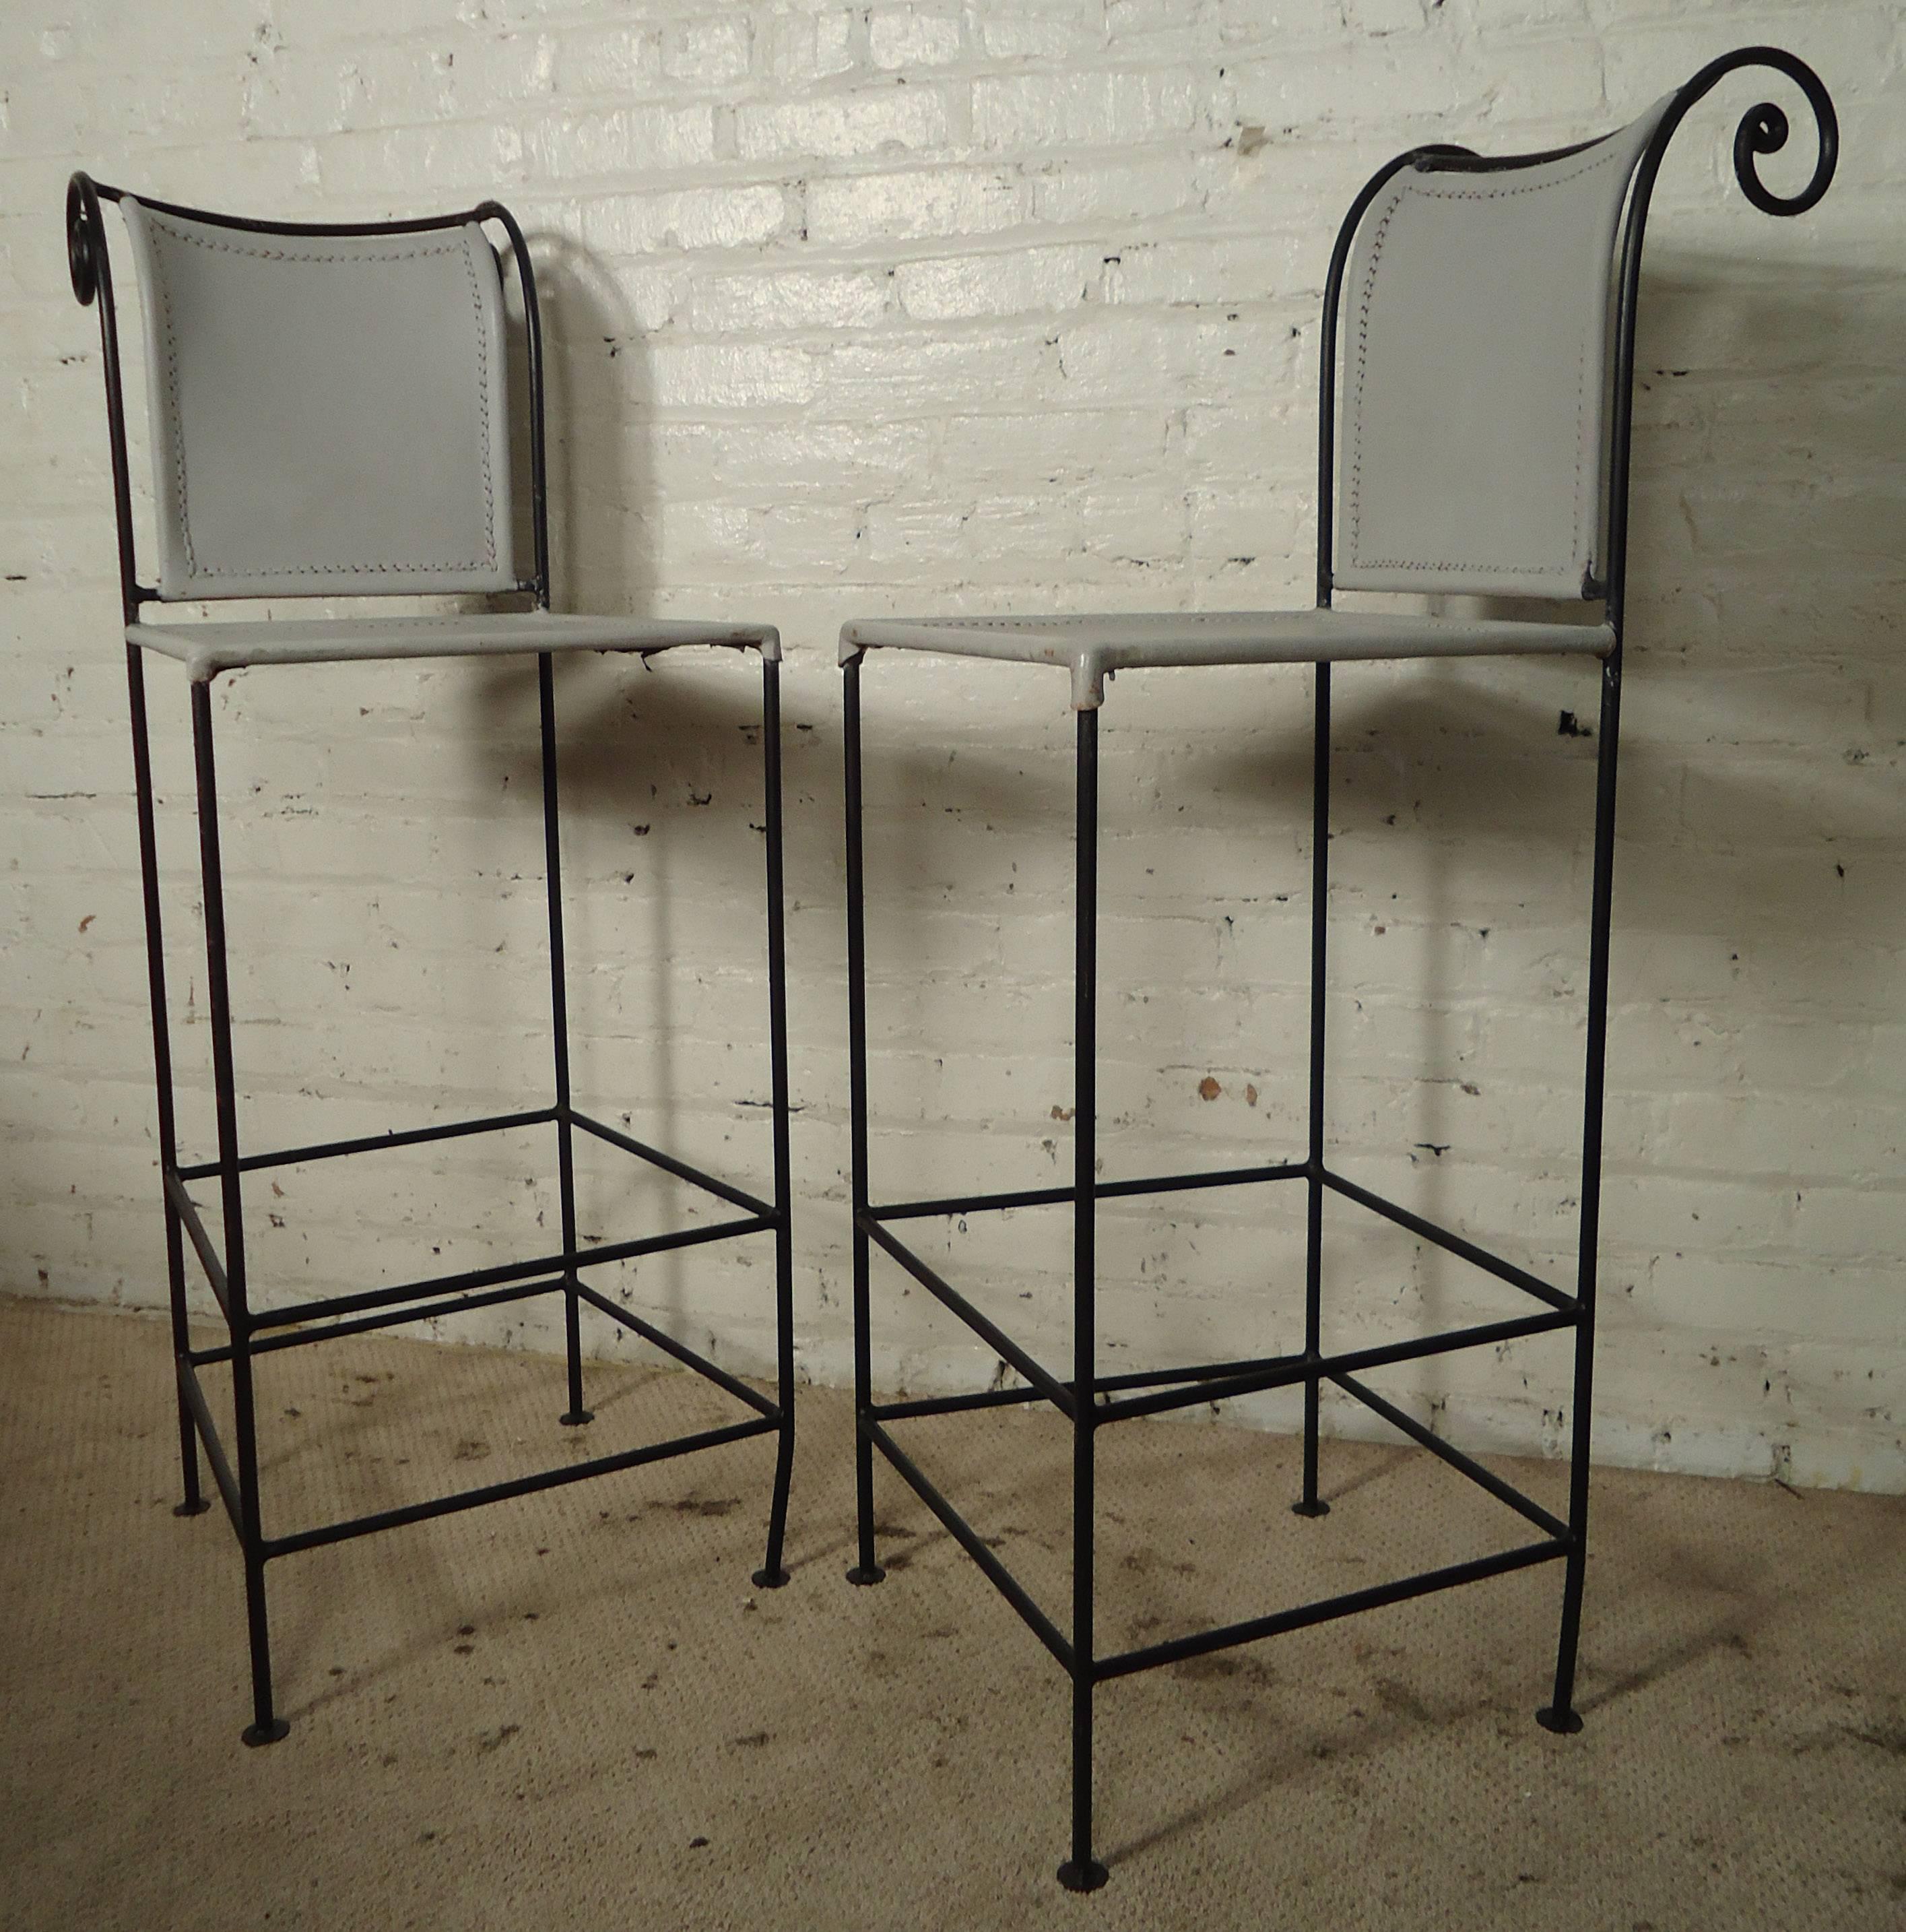 Two vintage-modern stools featuring sculpted iron bases and leather upholstered seats. Designed by Shaver-Howard. (4 similar stools available)